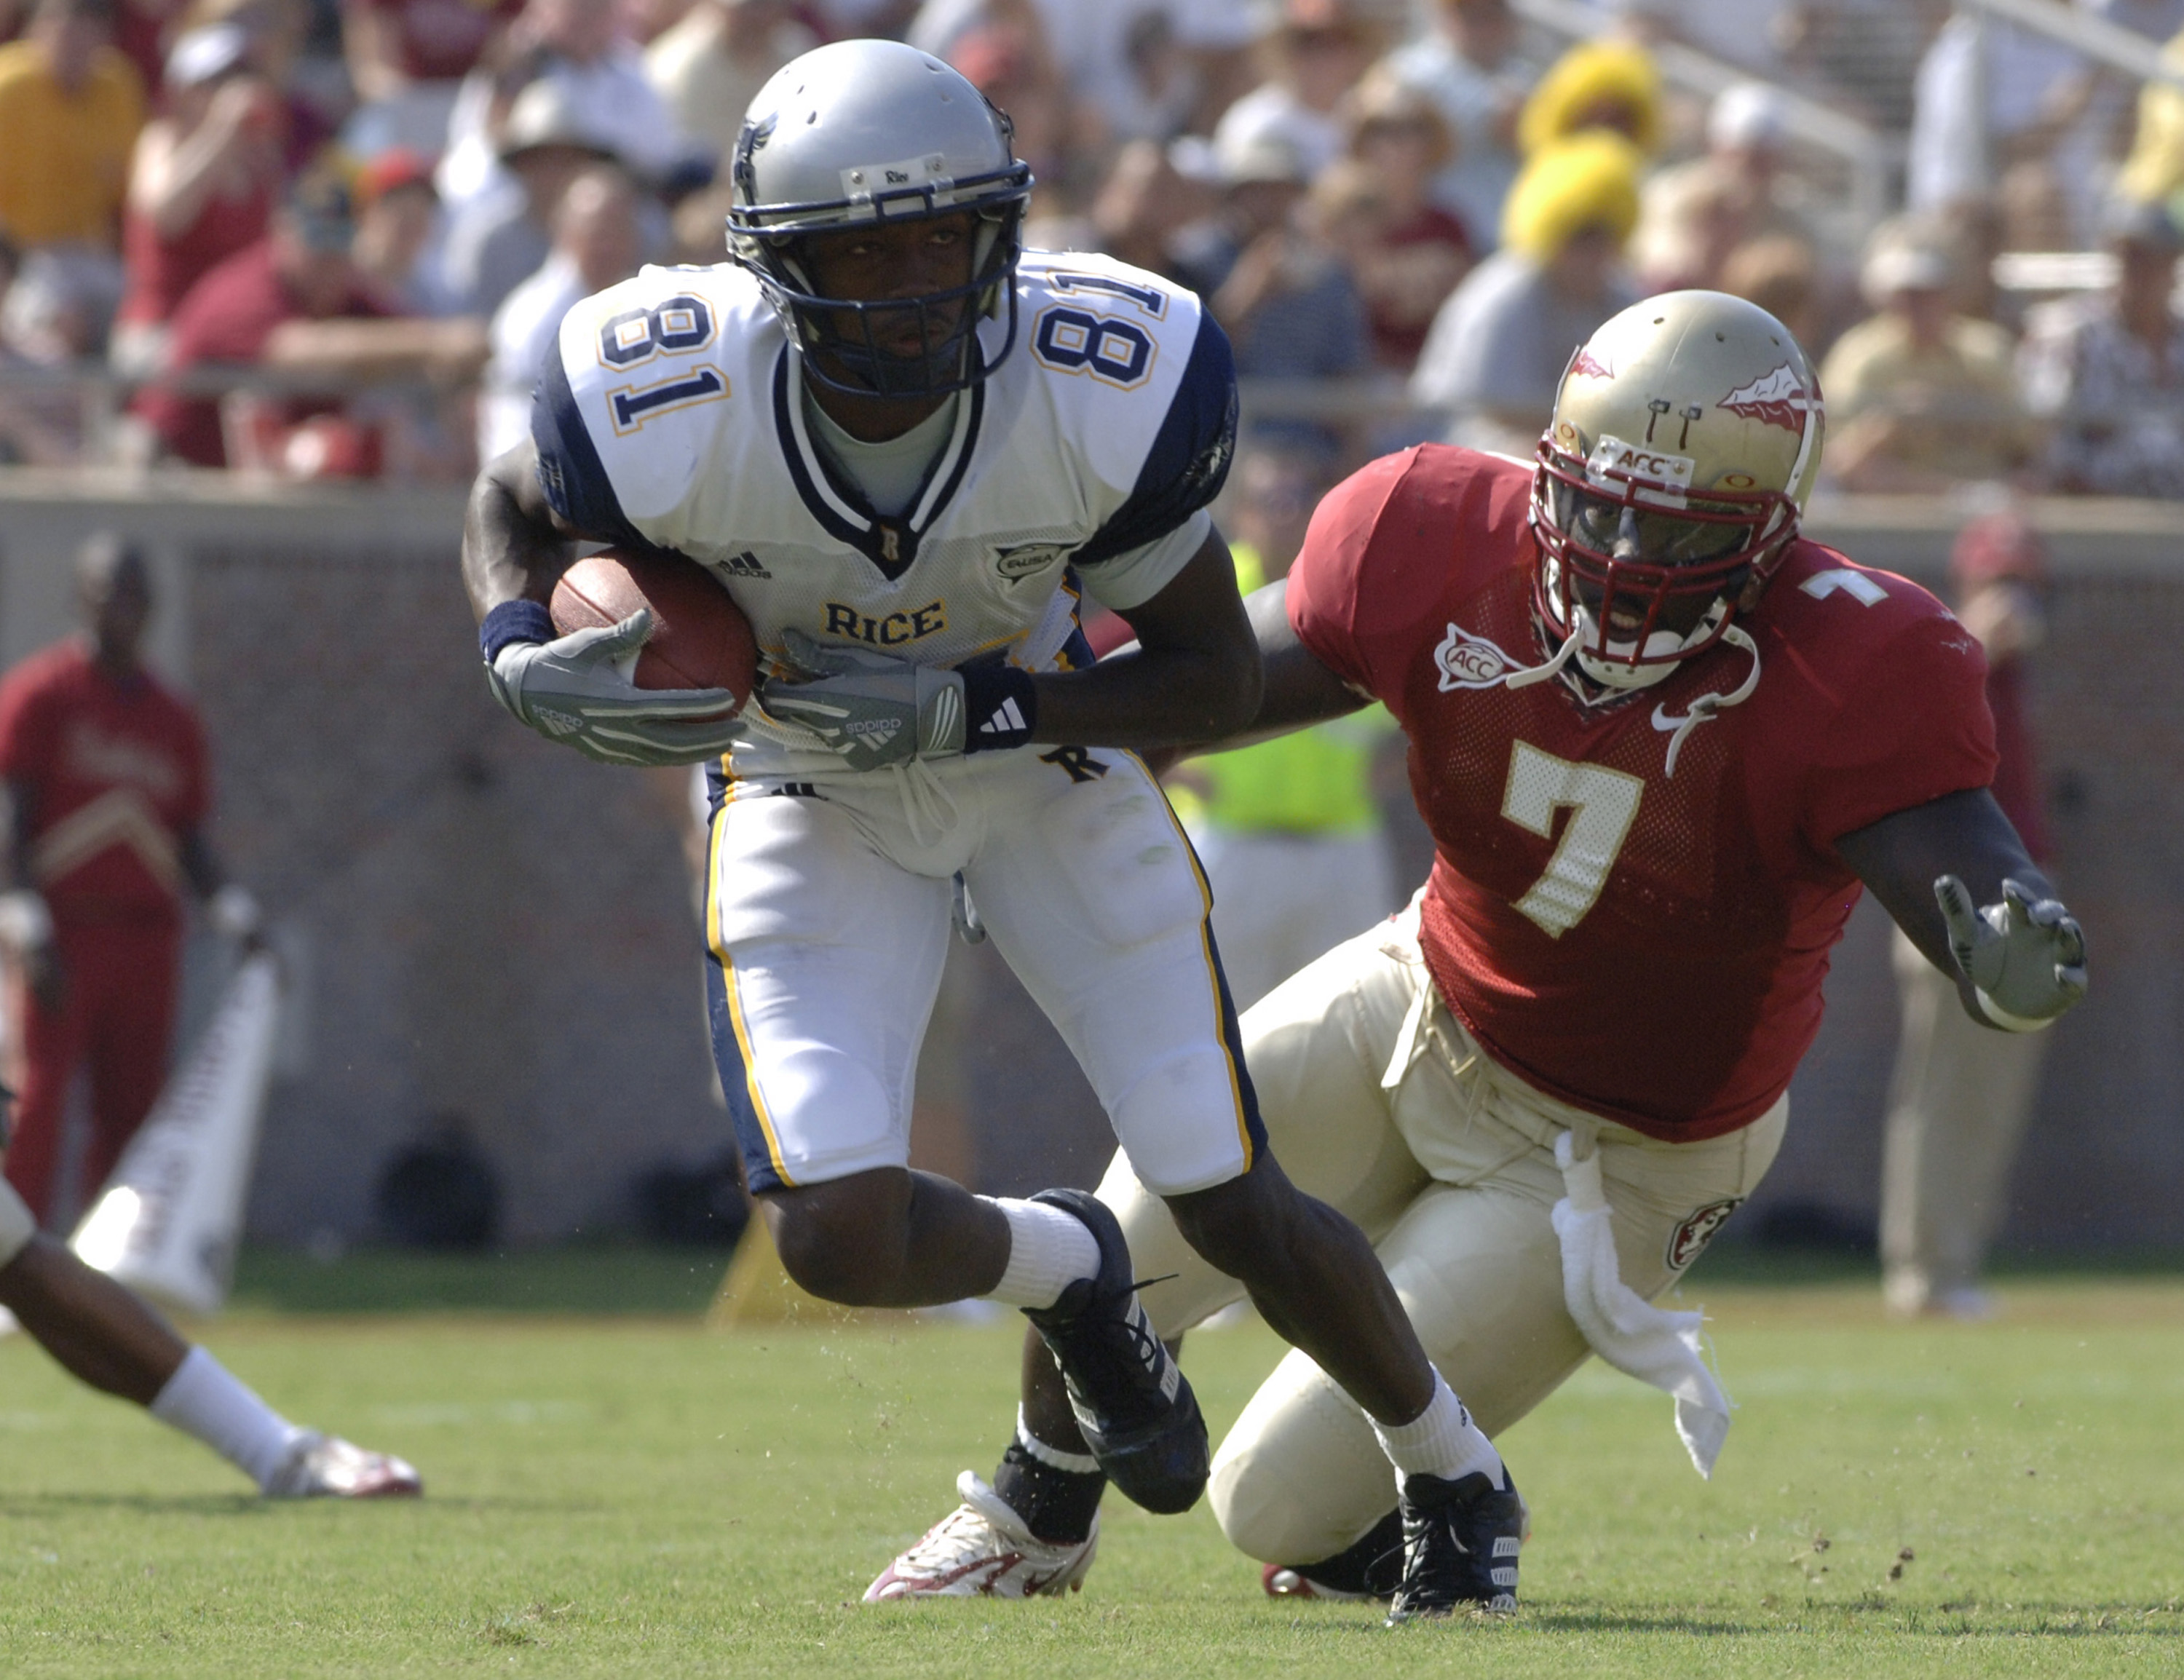 Rice  wide receiver Jarett Dillard rushes upfield with a catch against Florida State  Rice September 23, 2006 at Doak Campbell Stadium in Tallahassee, Florida. (Photo by A. Messerschmidt/Getty Images) *** Local Caption ***